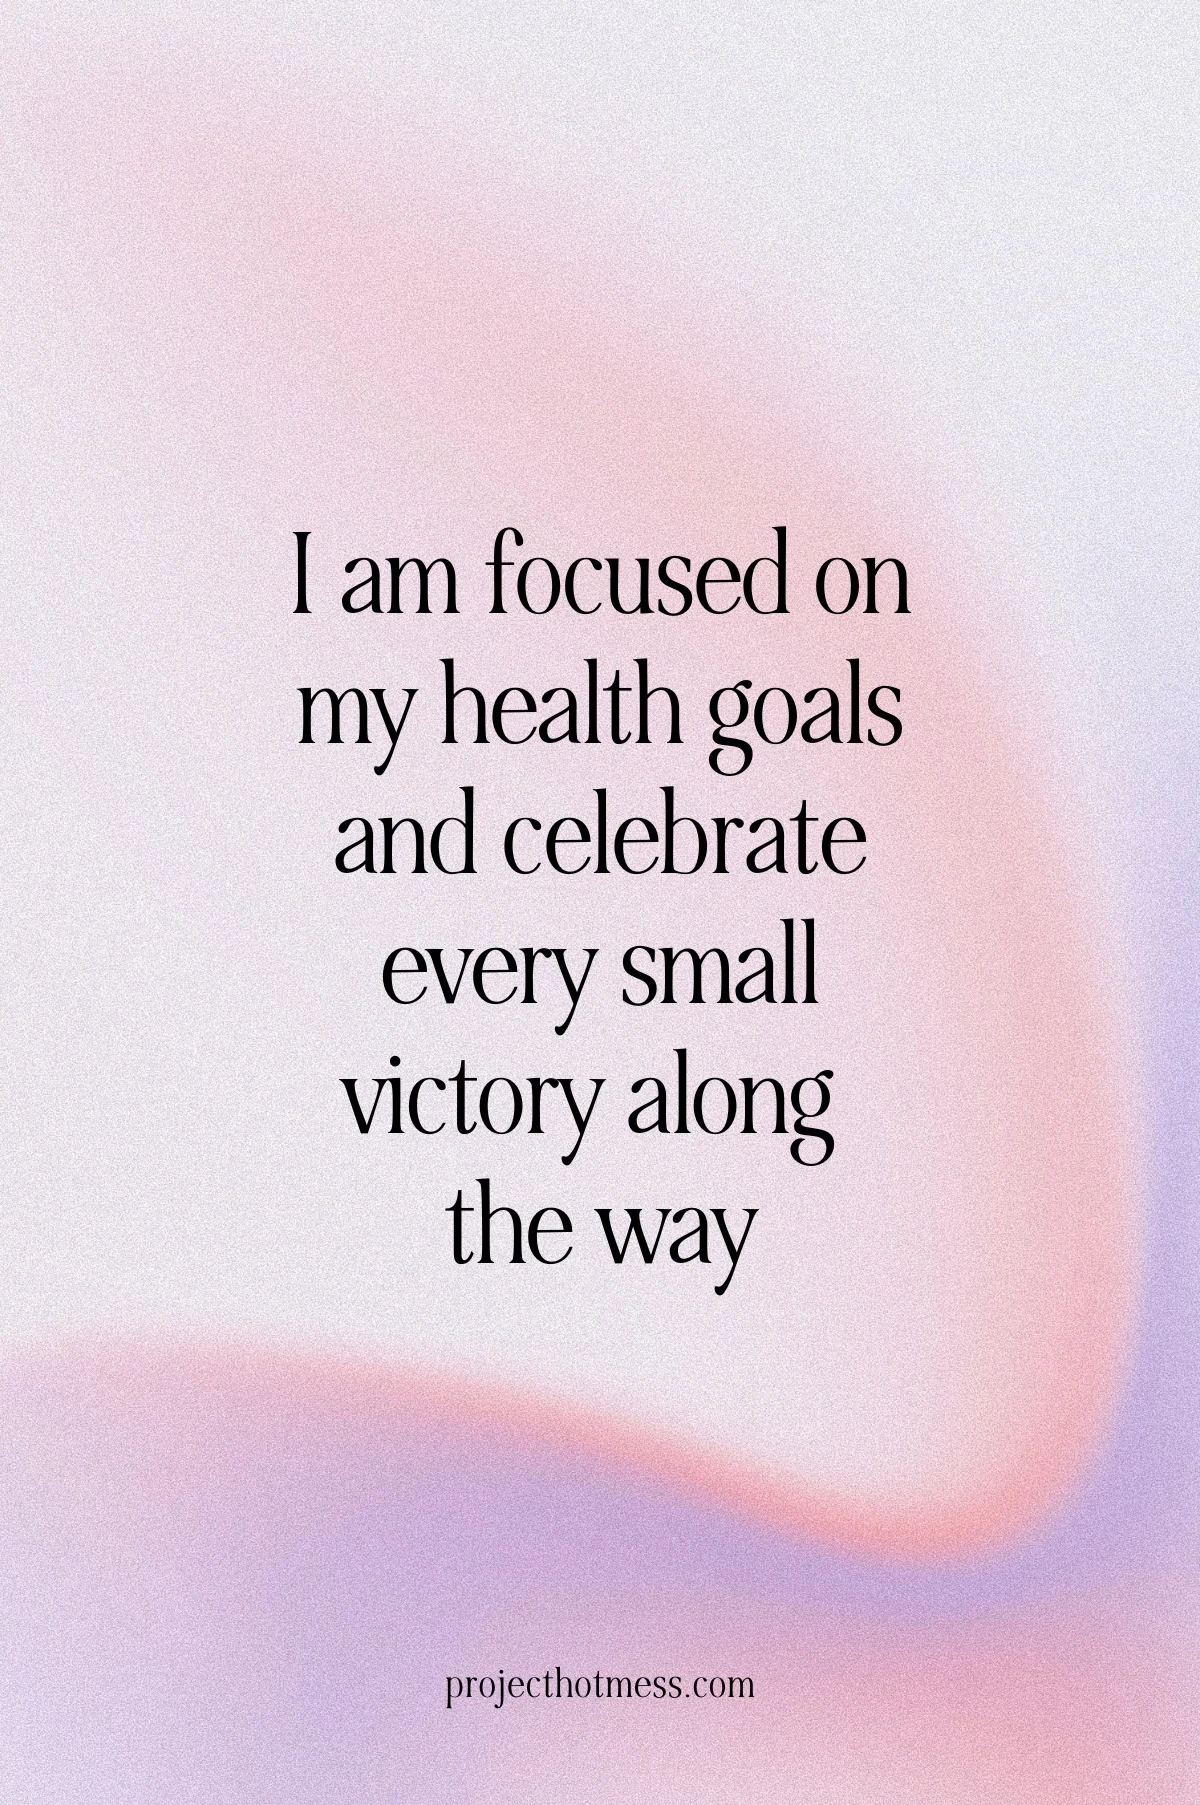 Your mindset plays a significant role in your weight loss journey. With 45 weight loss affirmations, you can transform your thoughts and build a strong foundation for success. Learn how to use positive affirmations effectively, visualize your success, and stay focused on your goals. Embrace the power of positive thinking and begin your journey to a healthier, happier you! 🎉🍏